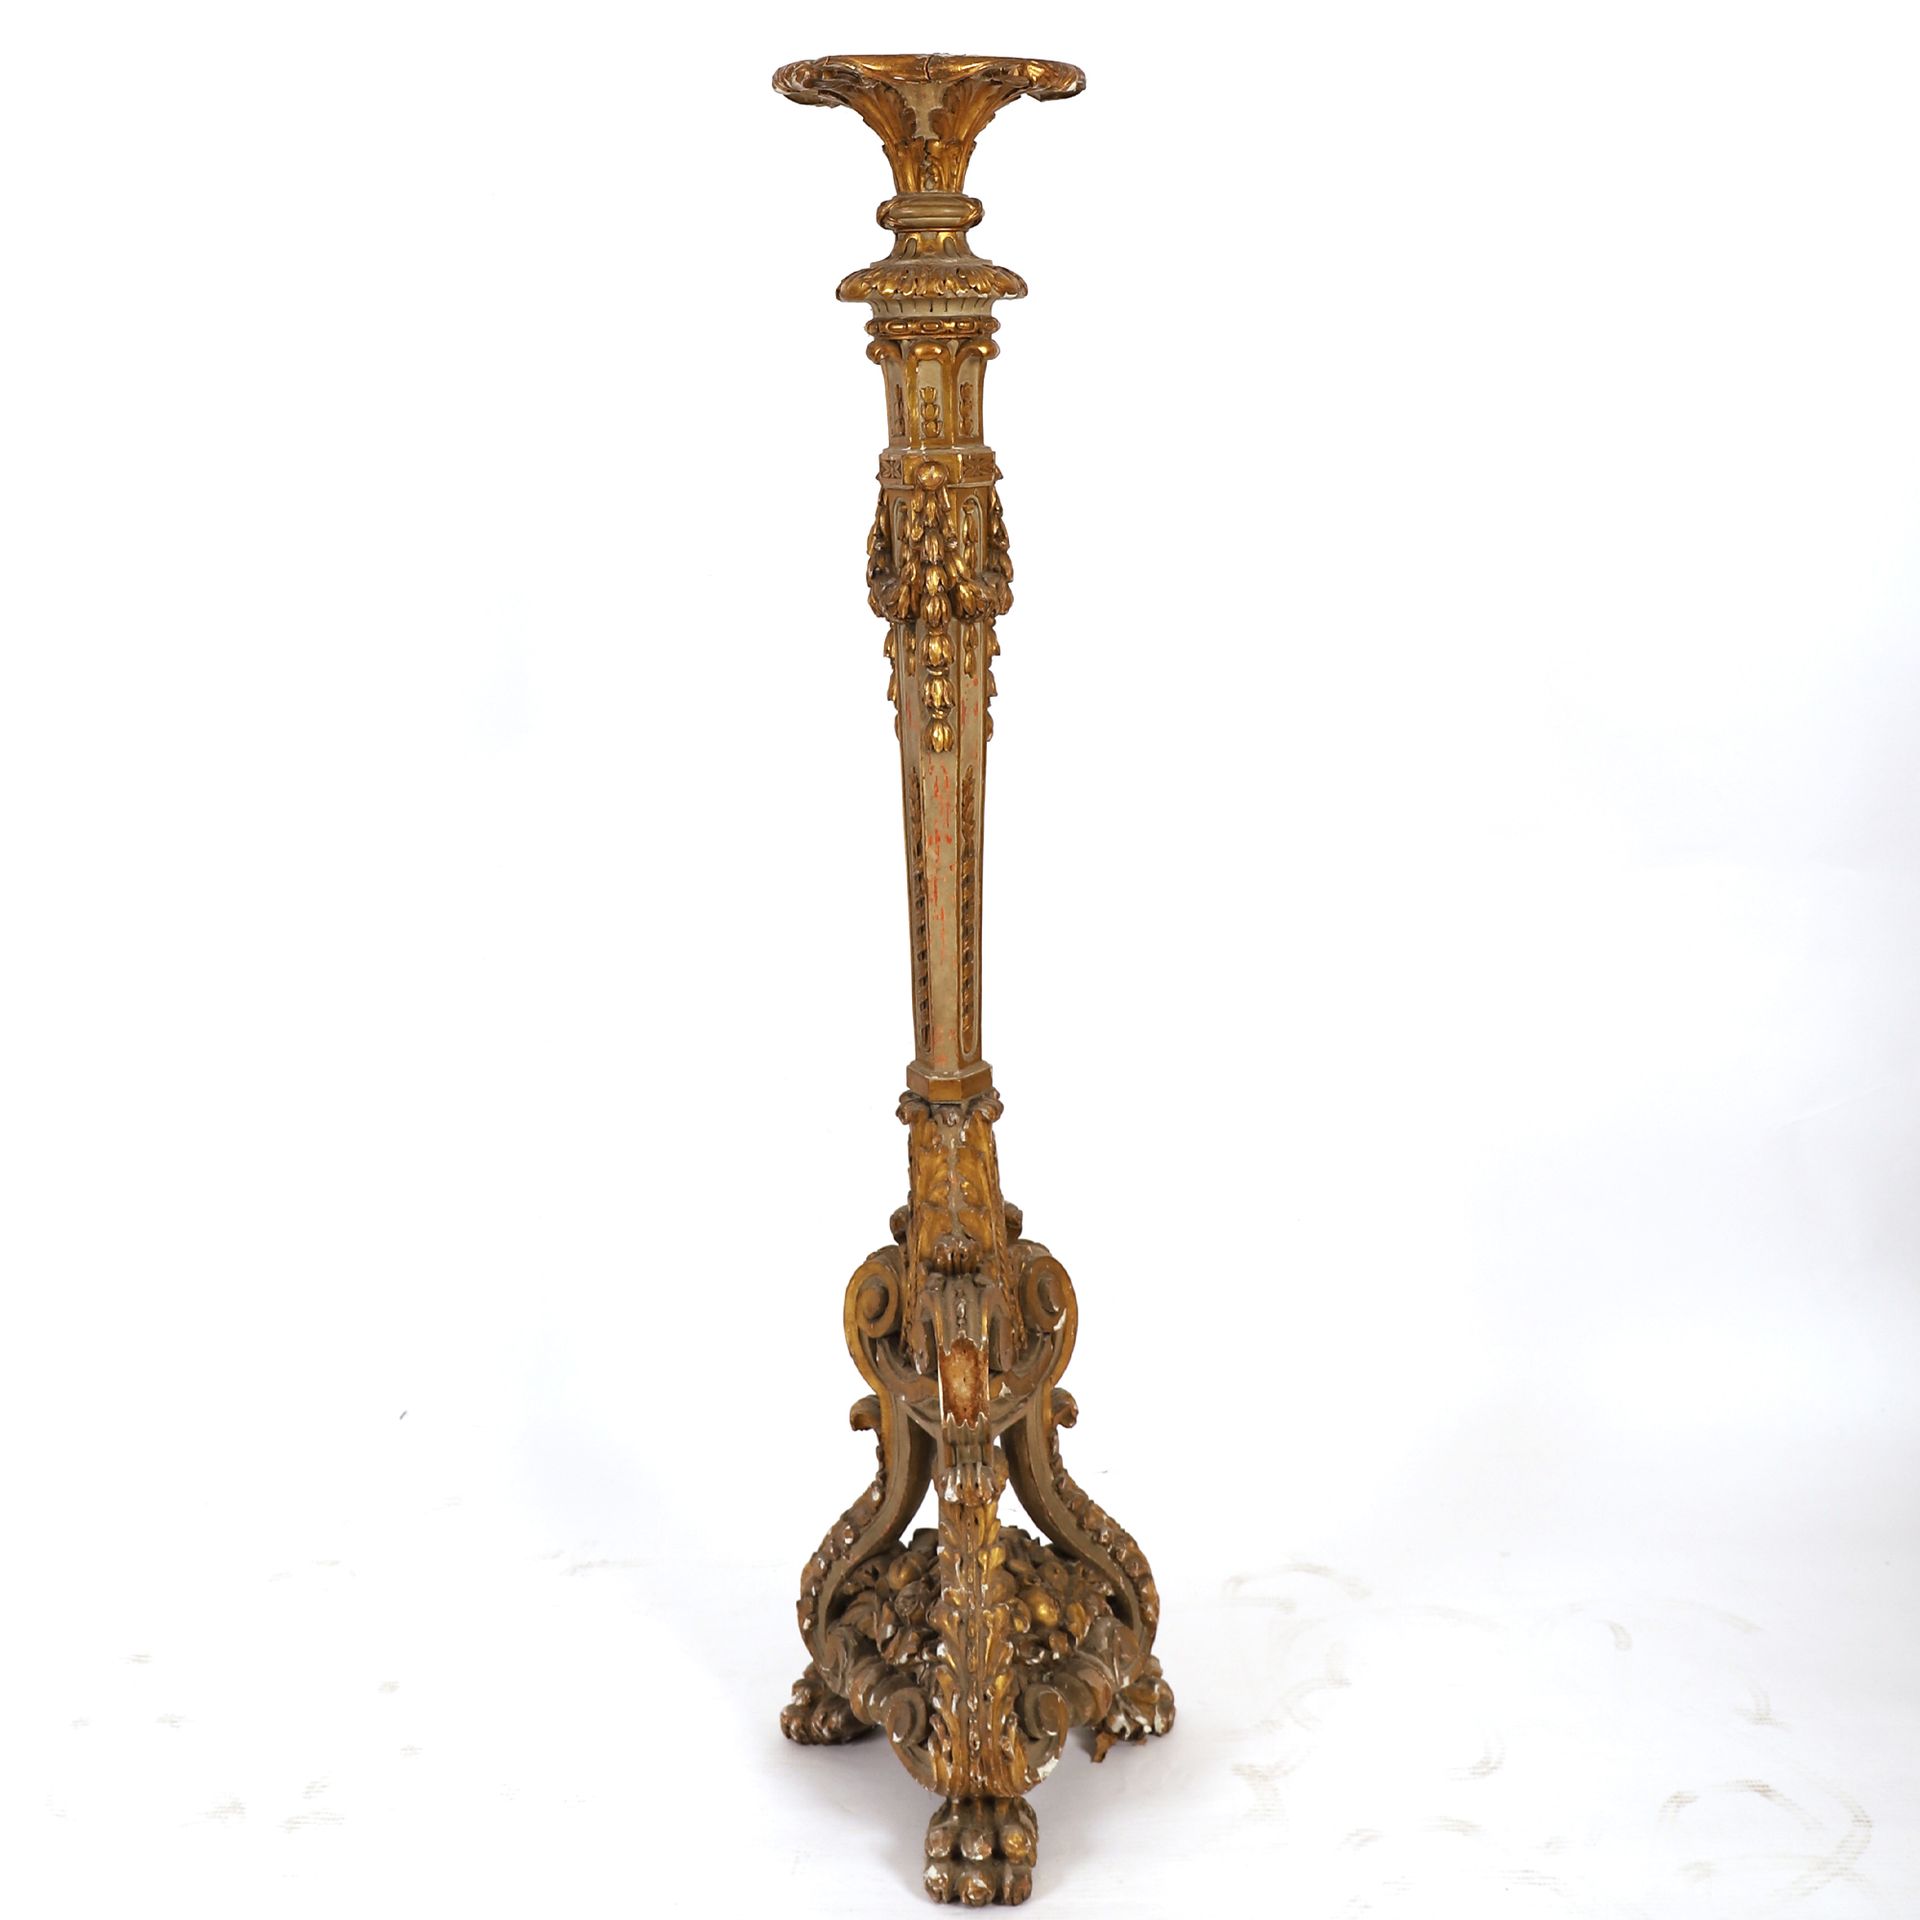 Null LARGE TRIPOD CANDLESTICK IN CARVED AND GILDED WOOD IN THE LOUIS XVI STYLE

&hellip;